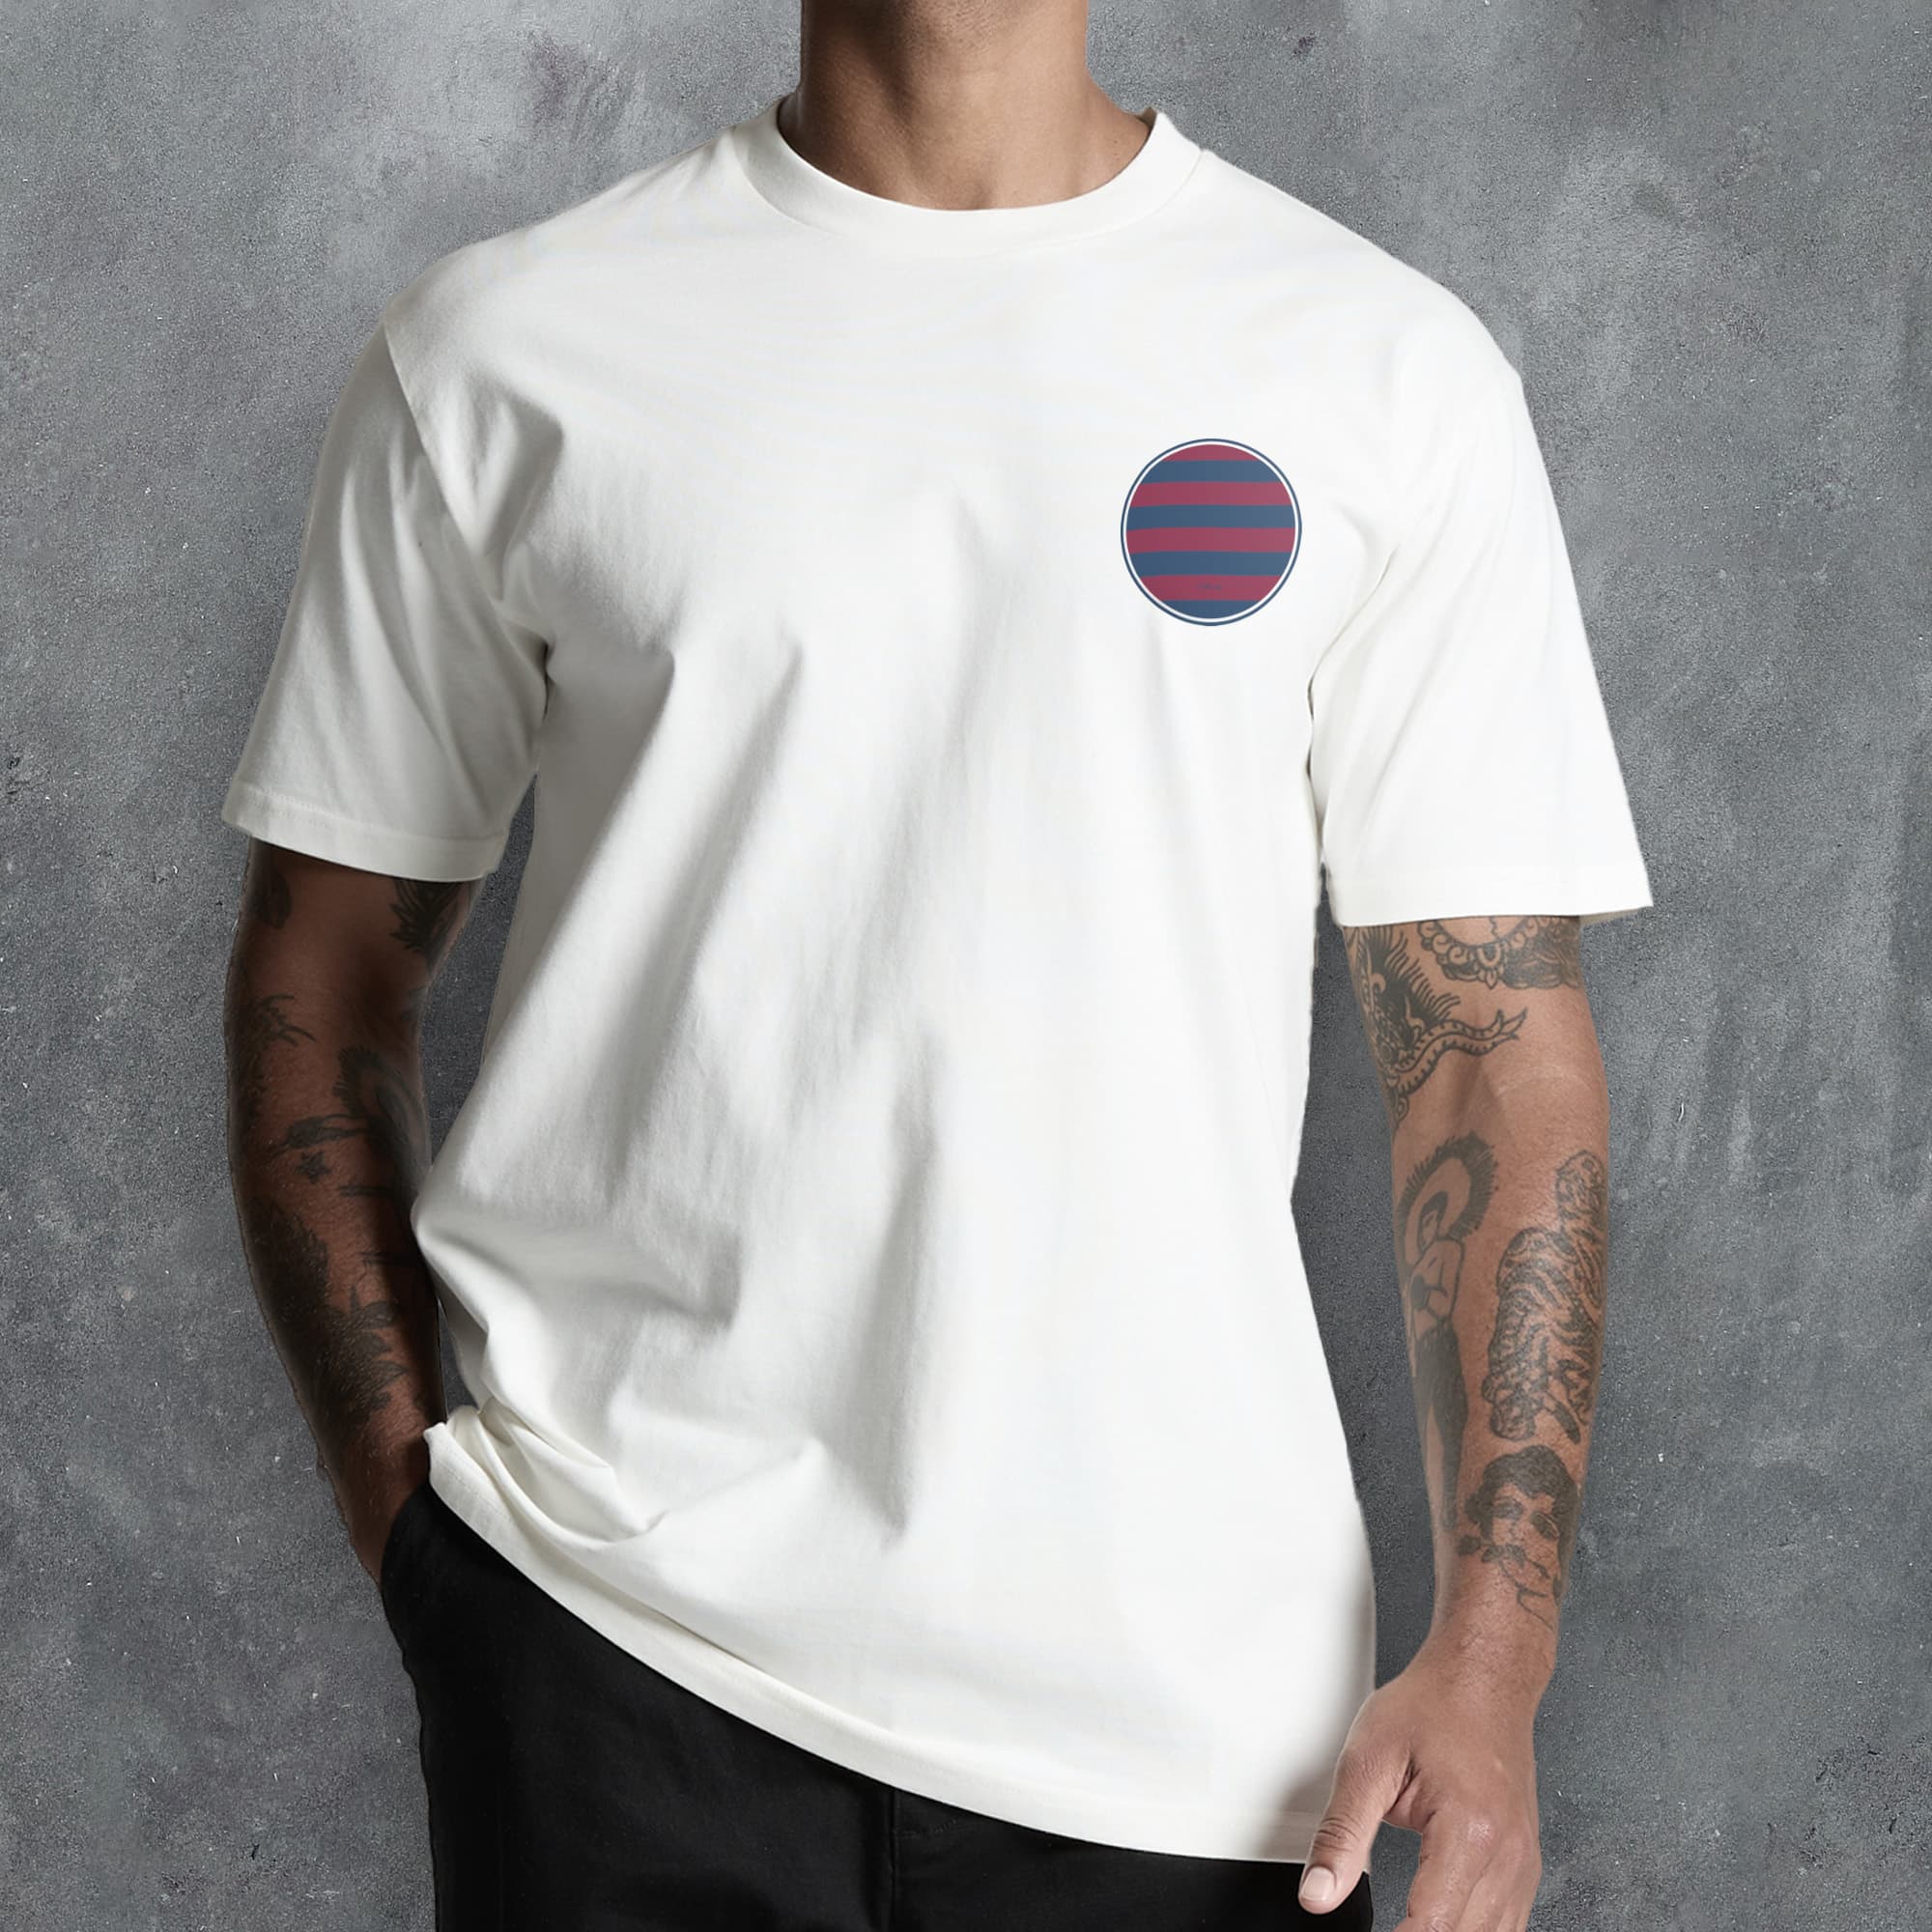 a man wearing a white t - shirt with a red and blue circle on the